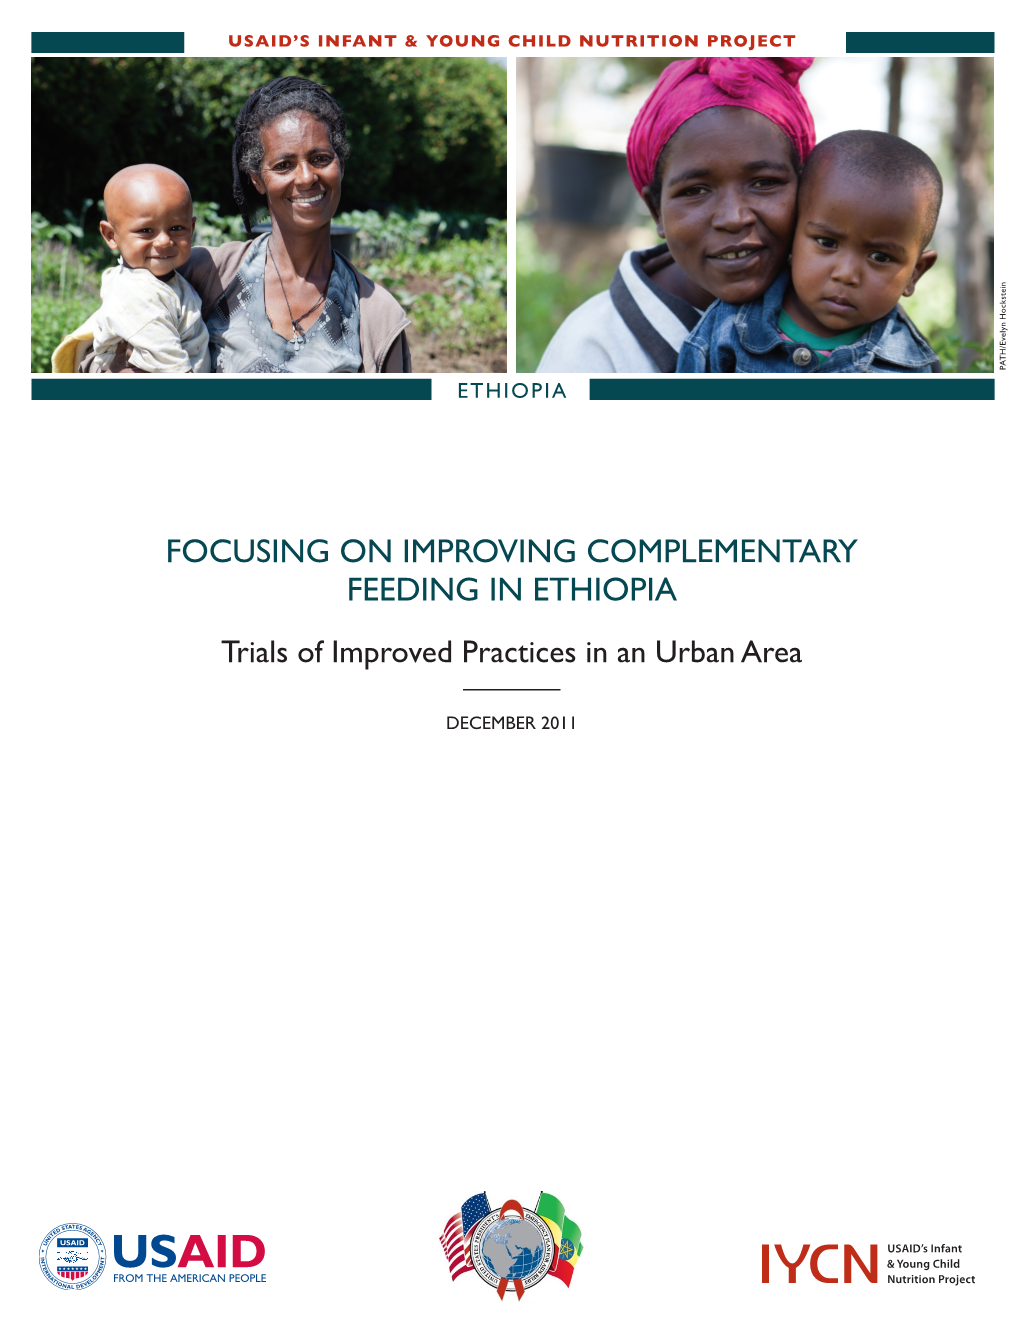 FOCUSING on IMPROVING COMPLEMENTARY FEEDING in ETHIOPIA Trials of Improved Practices in an Urban Area